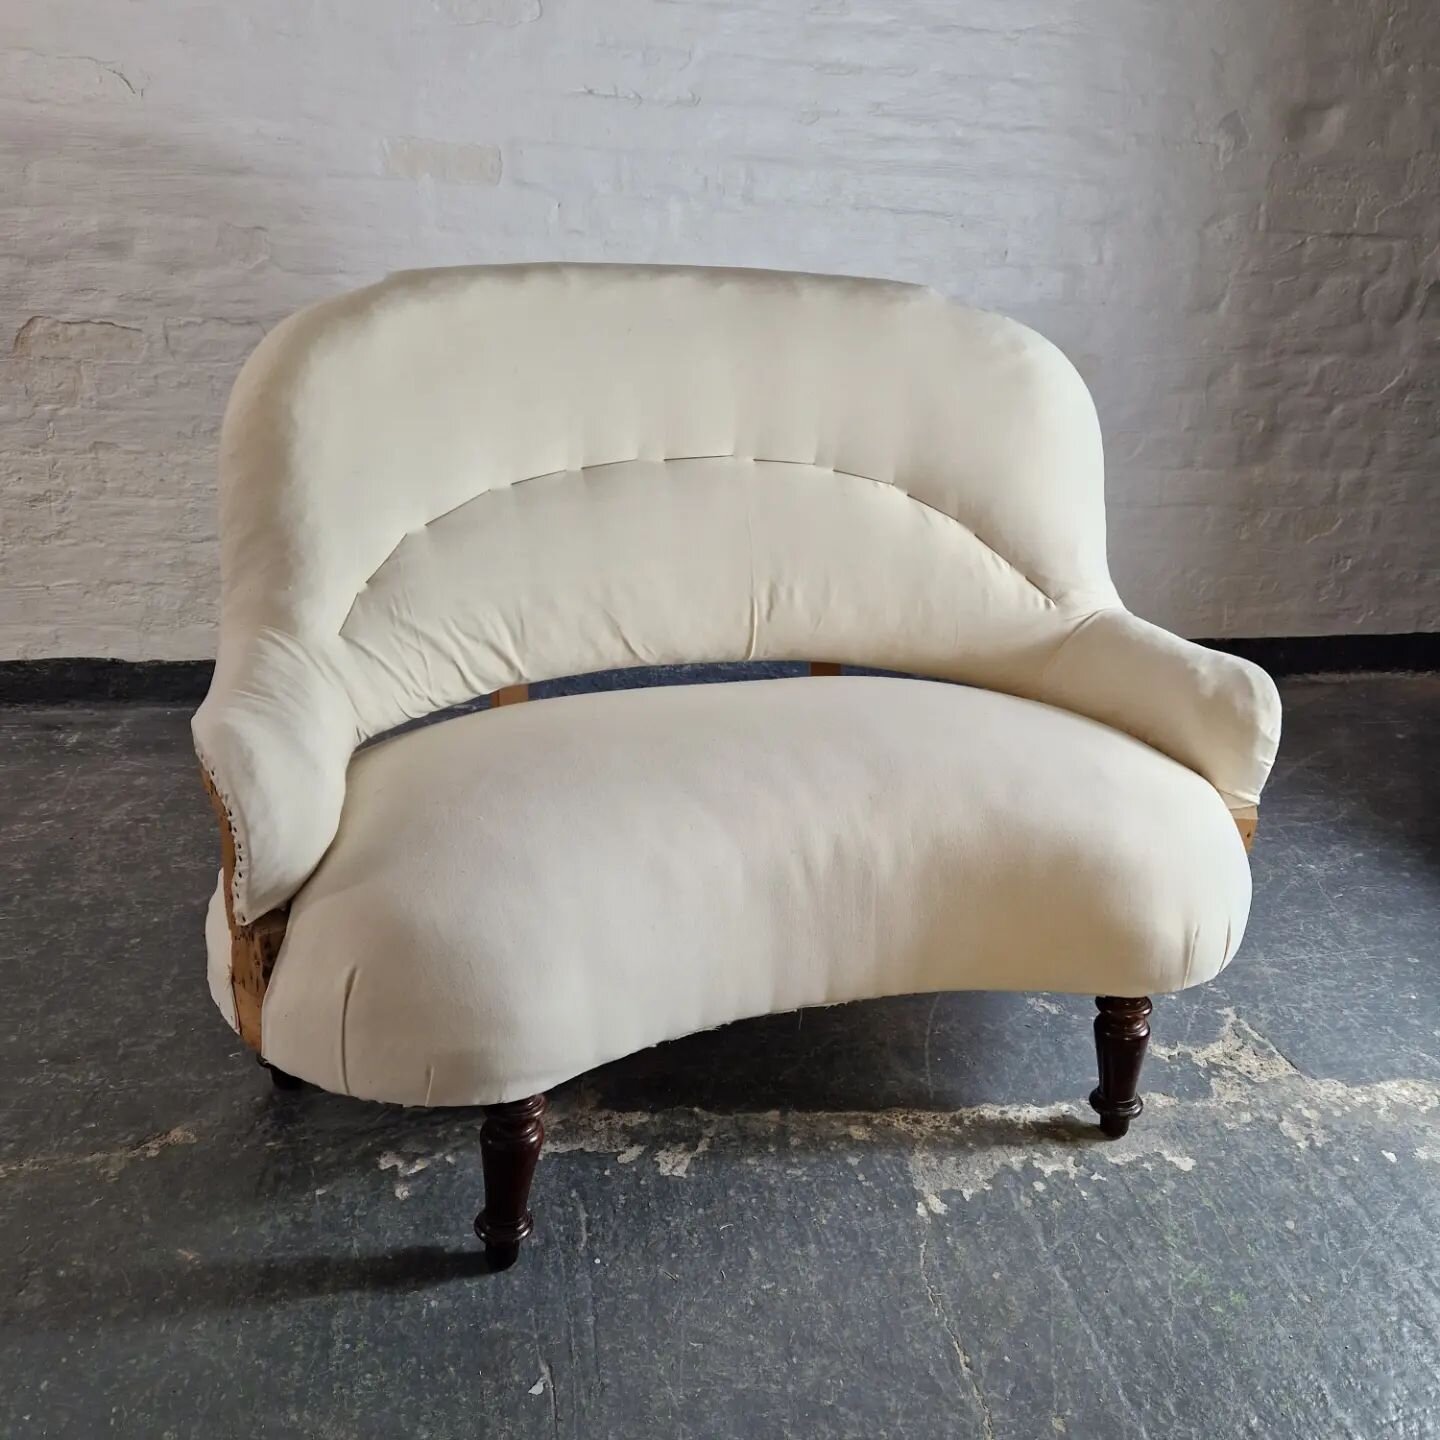 Happy New Year! 

Starting the year with this stunner. Swipe left for the before photo. 

Deconstructed antique French Napoleon lll sofa, unusual shape and size, sprung support in the middle and the back, rare model having 5 legs. 

It has been resto